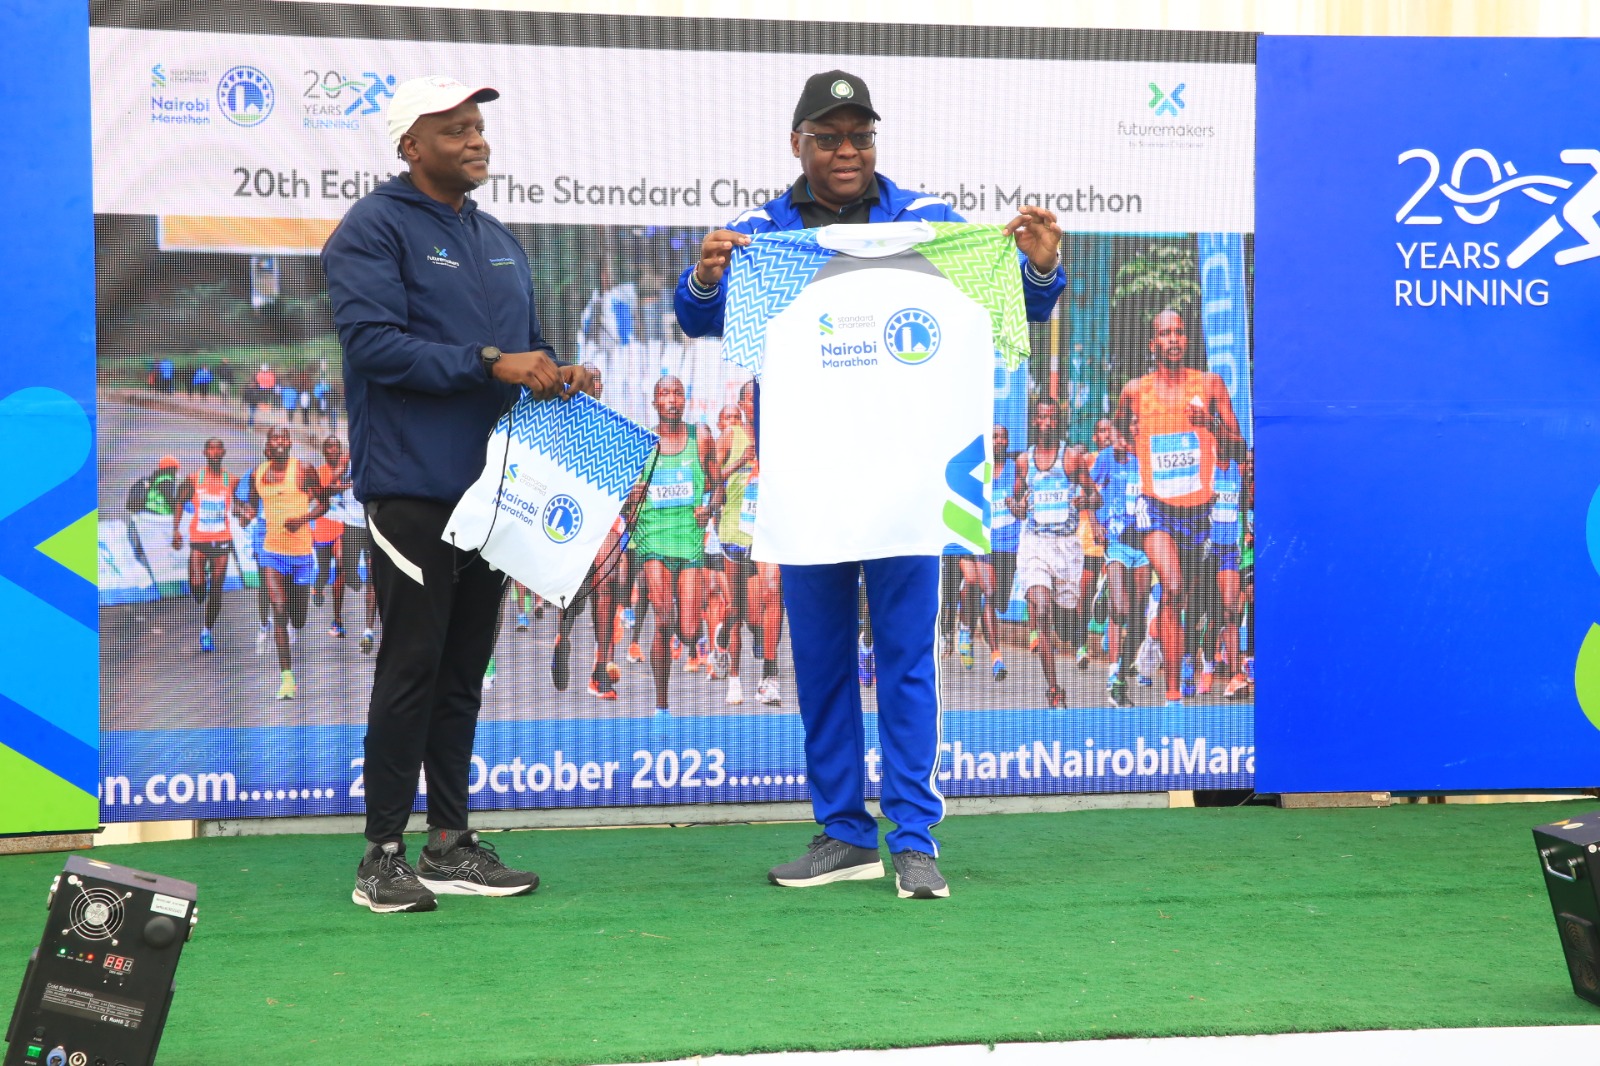 Standard Chartered Nairobi Marathon to Incorporate Latest Technology in 2023 Competition